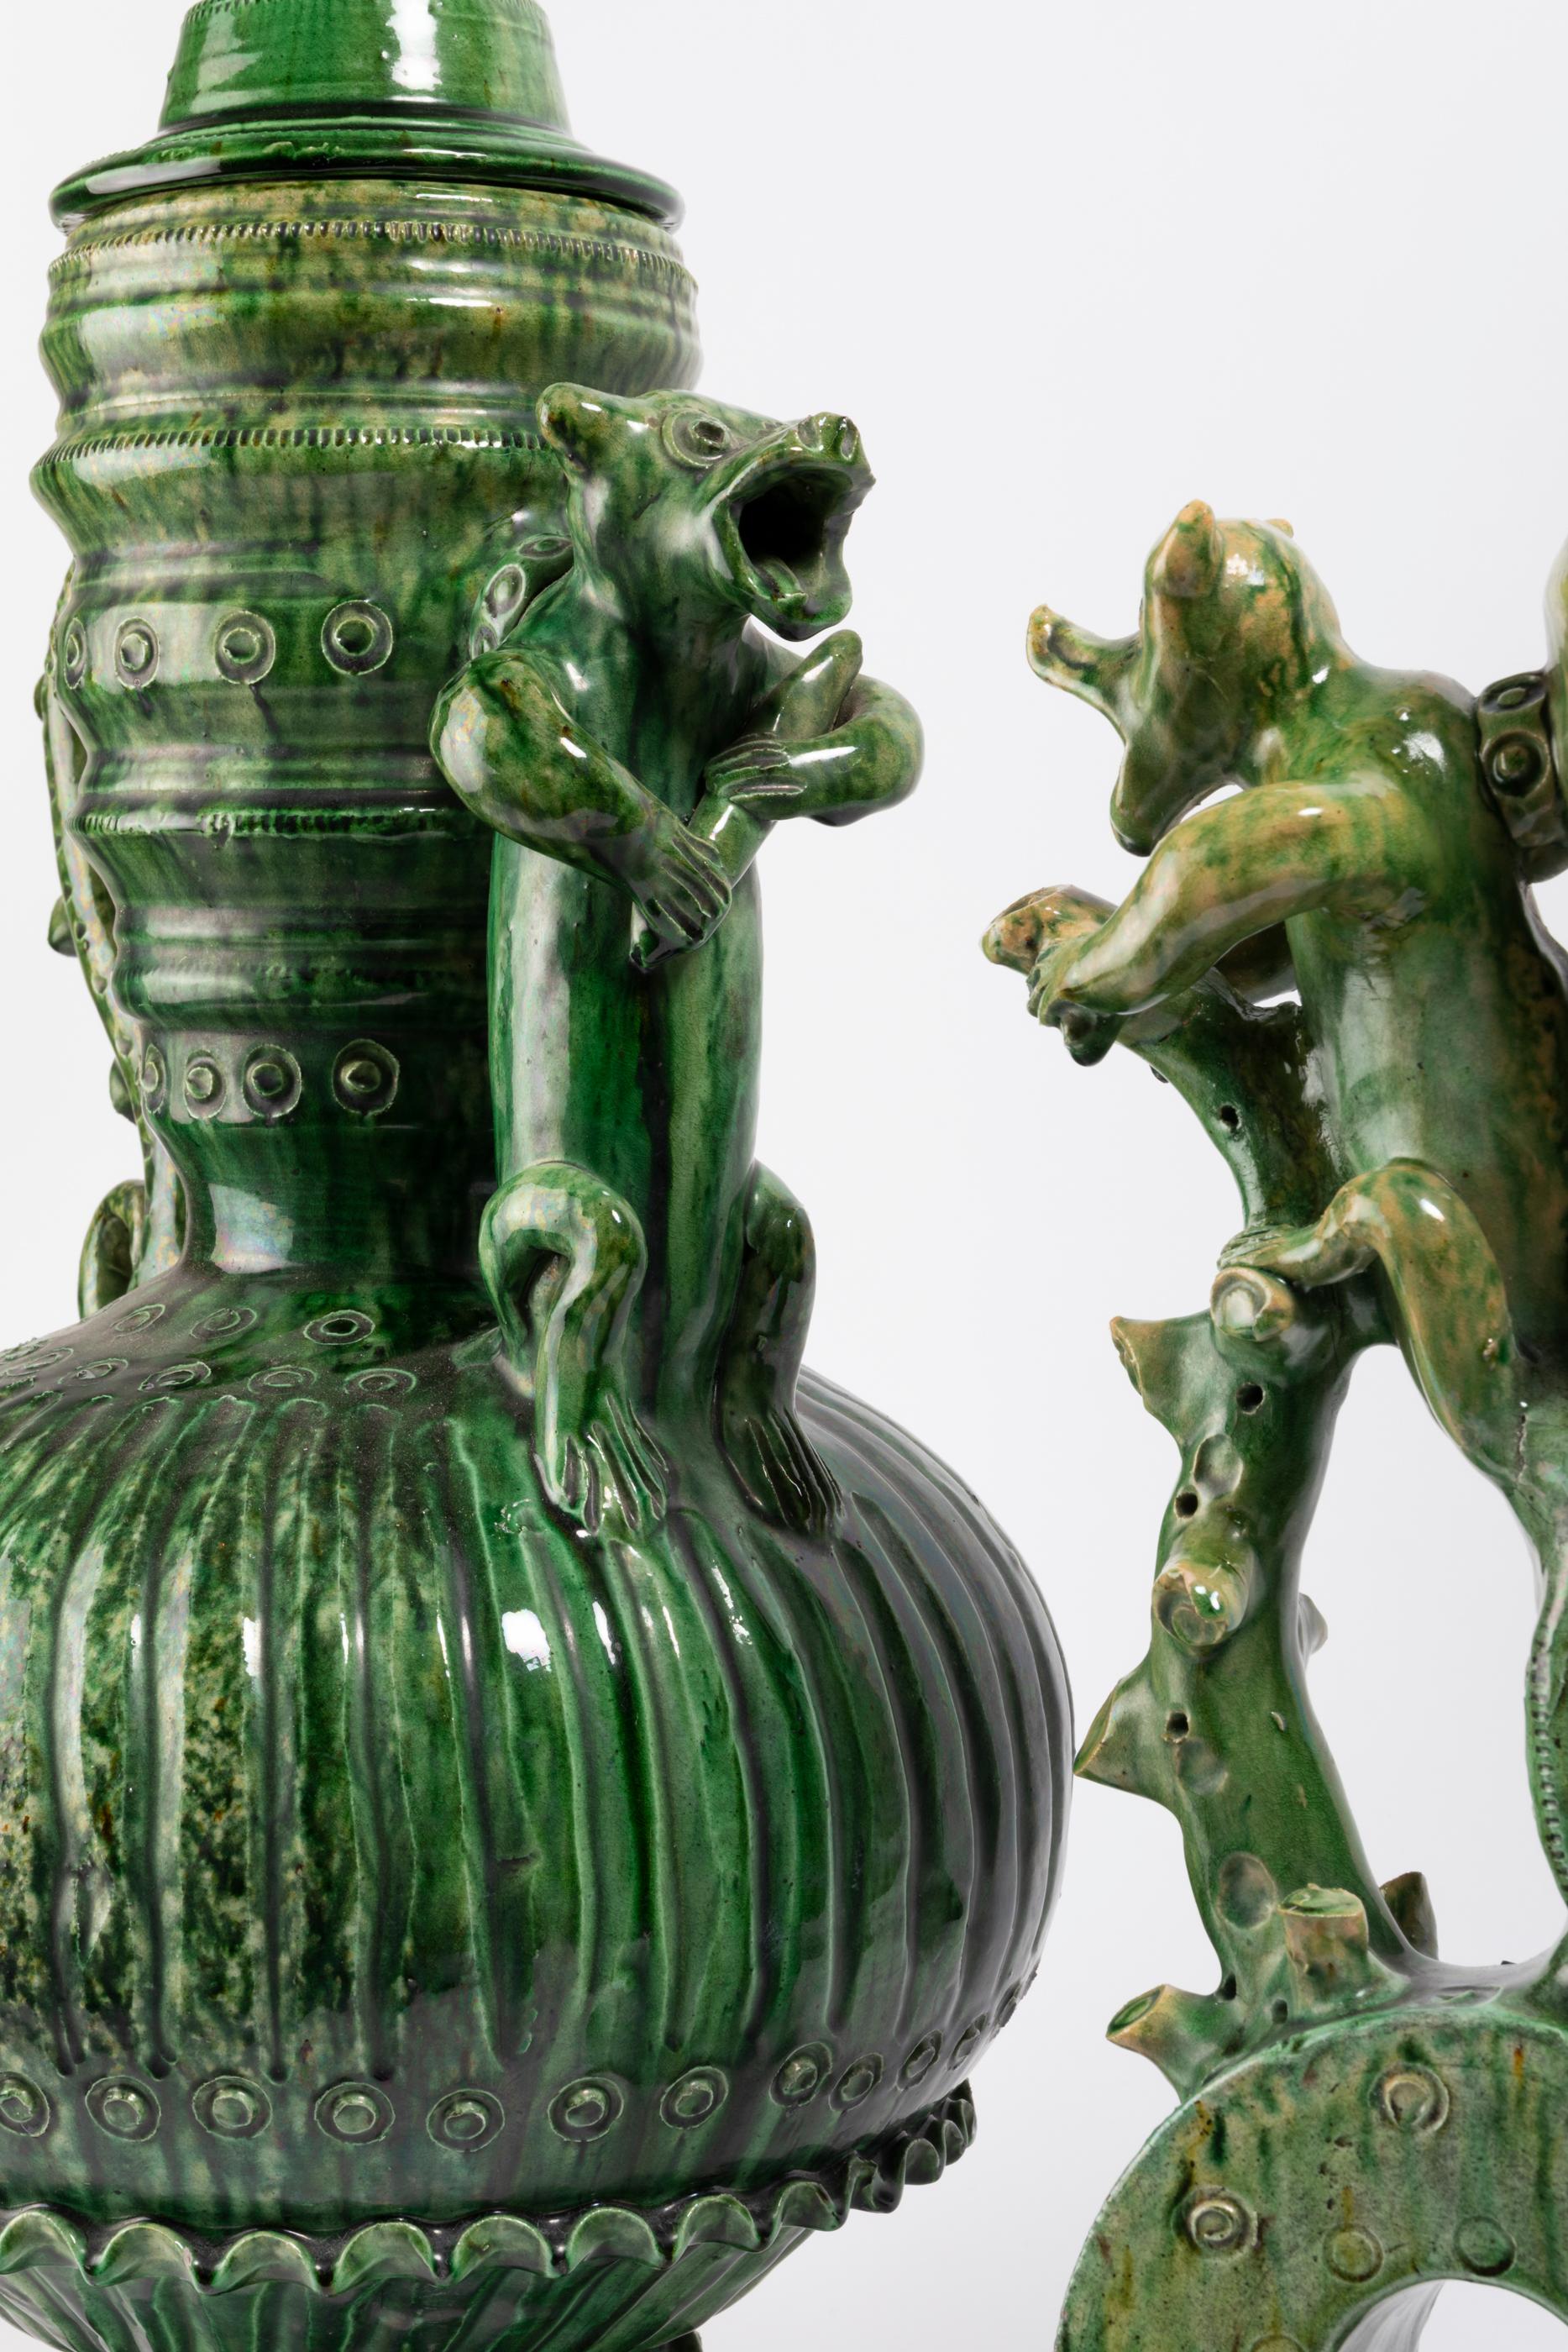 Pair of vases with molded lids figuring a bird.
Green glazed clay vases with molded-relief decoration. 
In the style of the Pré d'Auge, Malicorne or Saintonge production from the sixteenth to the nineteenth century.
France,